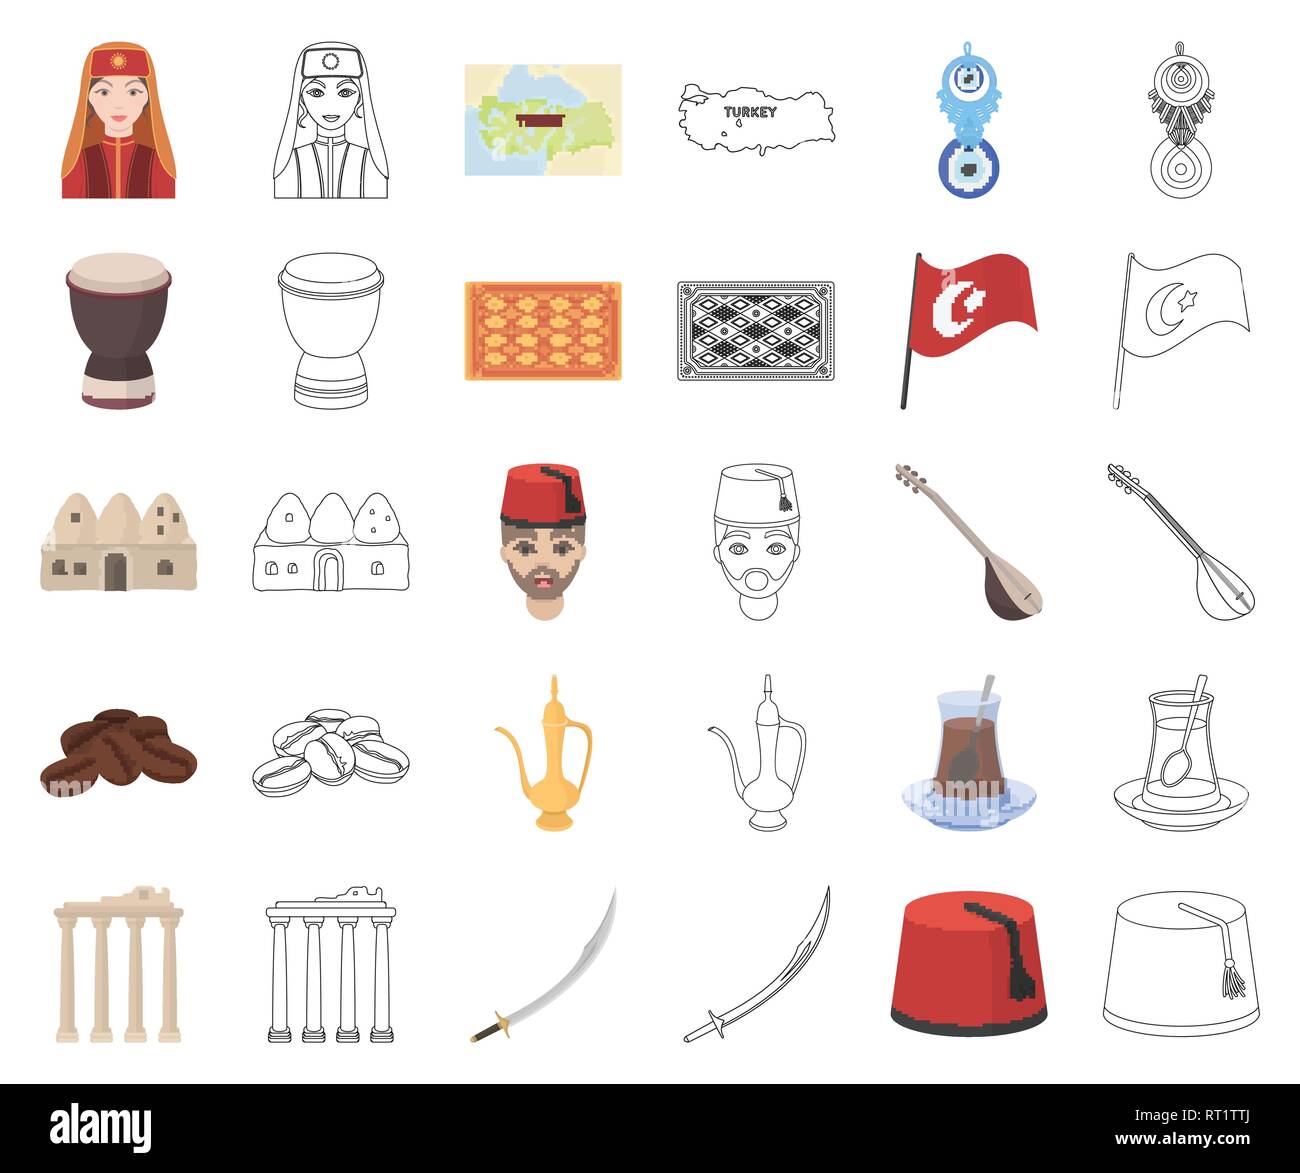 amulet,art,attraction,beans,beehive,carpet,cartoon,outline,coffee,collection,country,culture,design,drum,fez,flag,goblet,hookah,house,icon,illustration,isolated,journey,jug,kilij,logo,man,nazar,population,ruins,saz,set,showplace,sight,sign,symbol,tea,territory,tourism,traditions,traveling,turkey,turkish,vector,web,woman Vector Vectors , Stock Vector